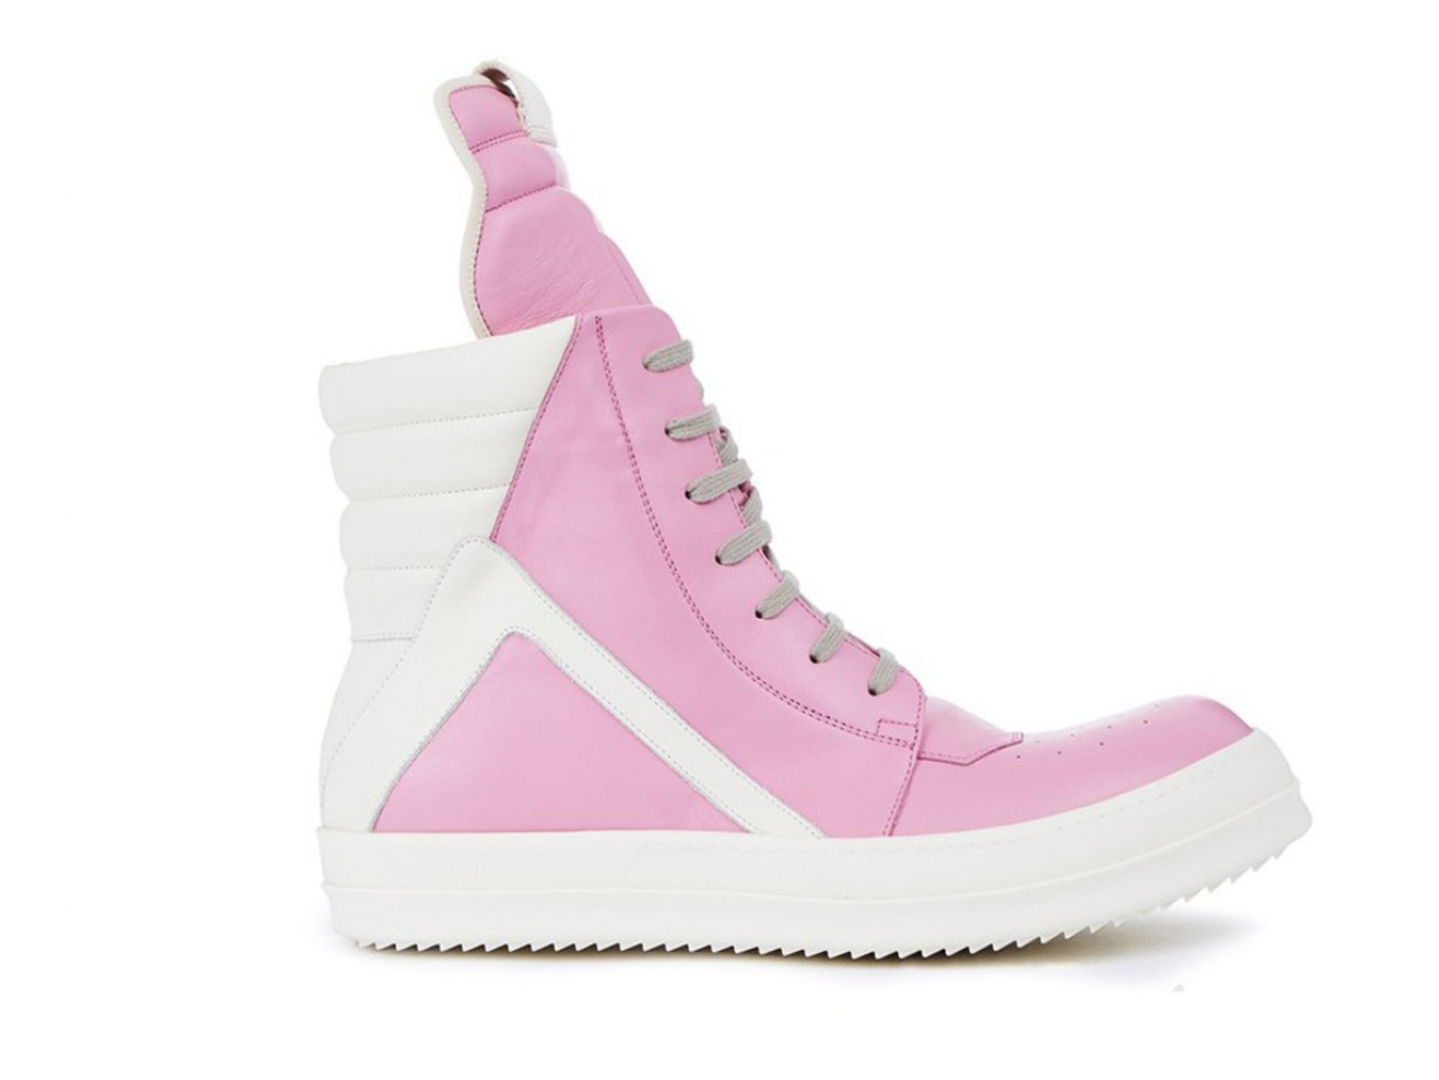 15 Sneakers To Add To Your Wardrobe This Spring